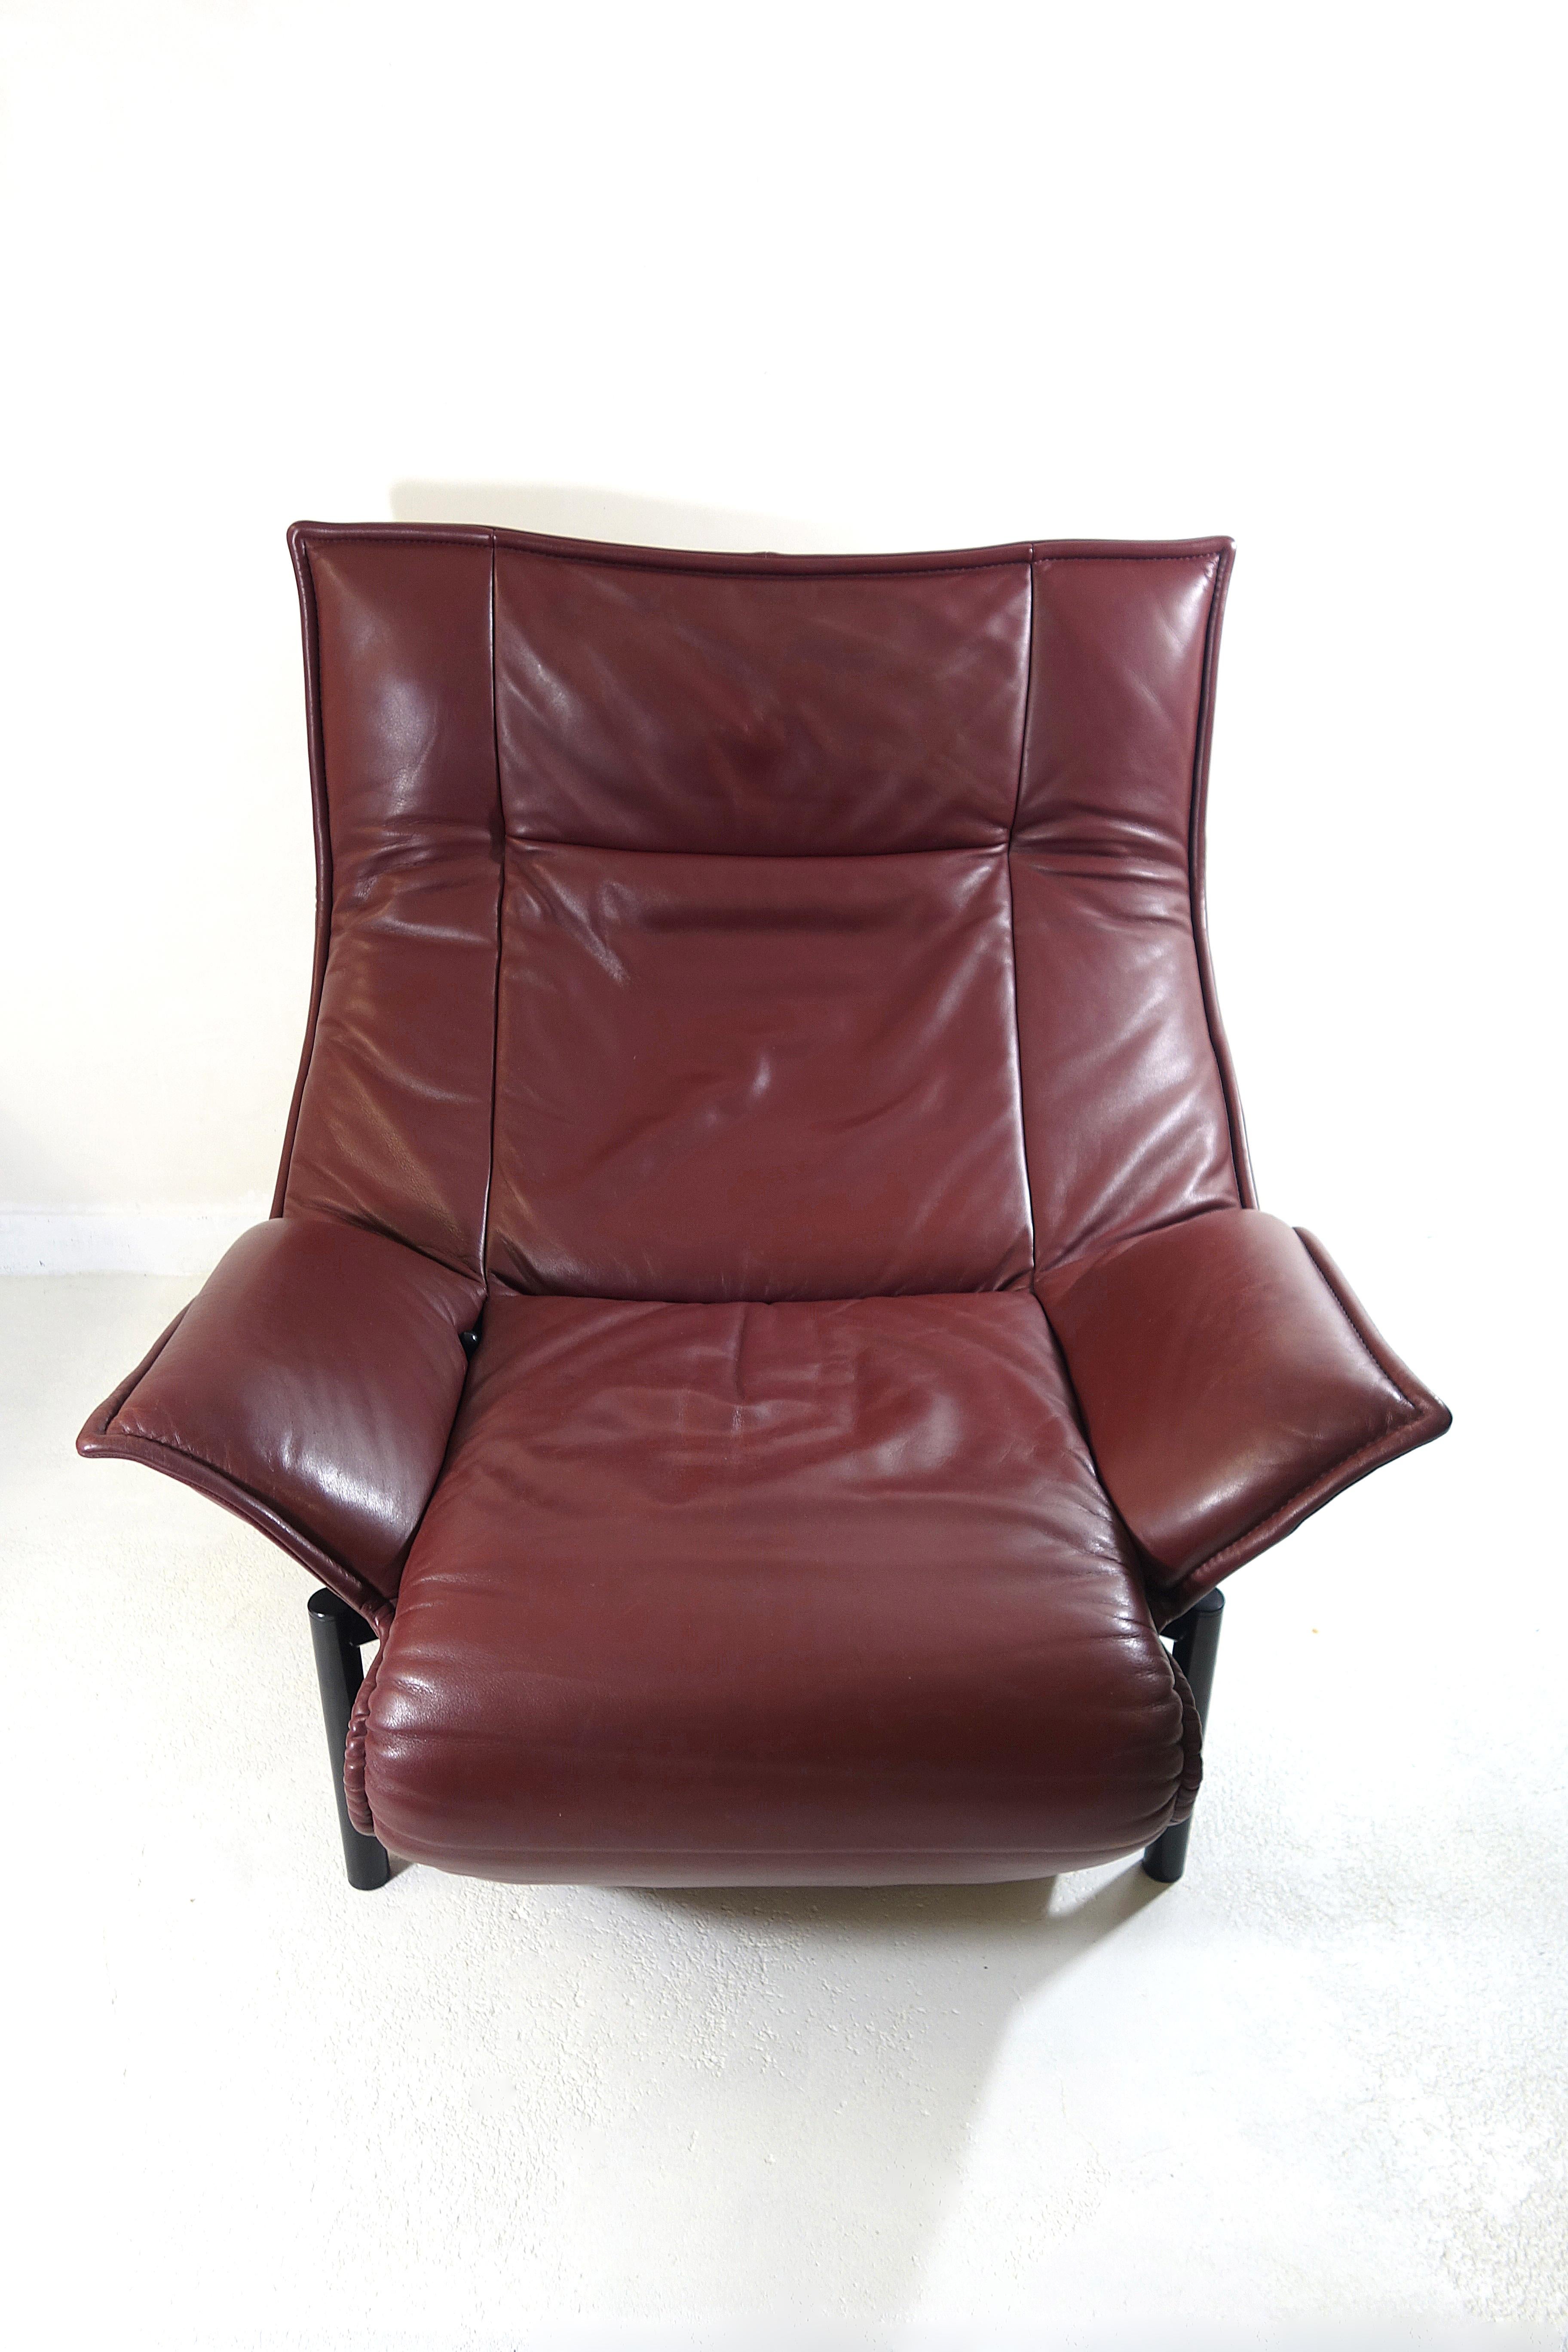 Veranda Lounge Chair by Vico Magistretti for Cassina in Brown Leather Reclining 2